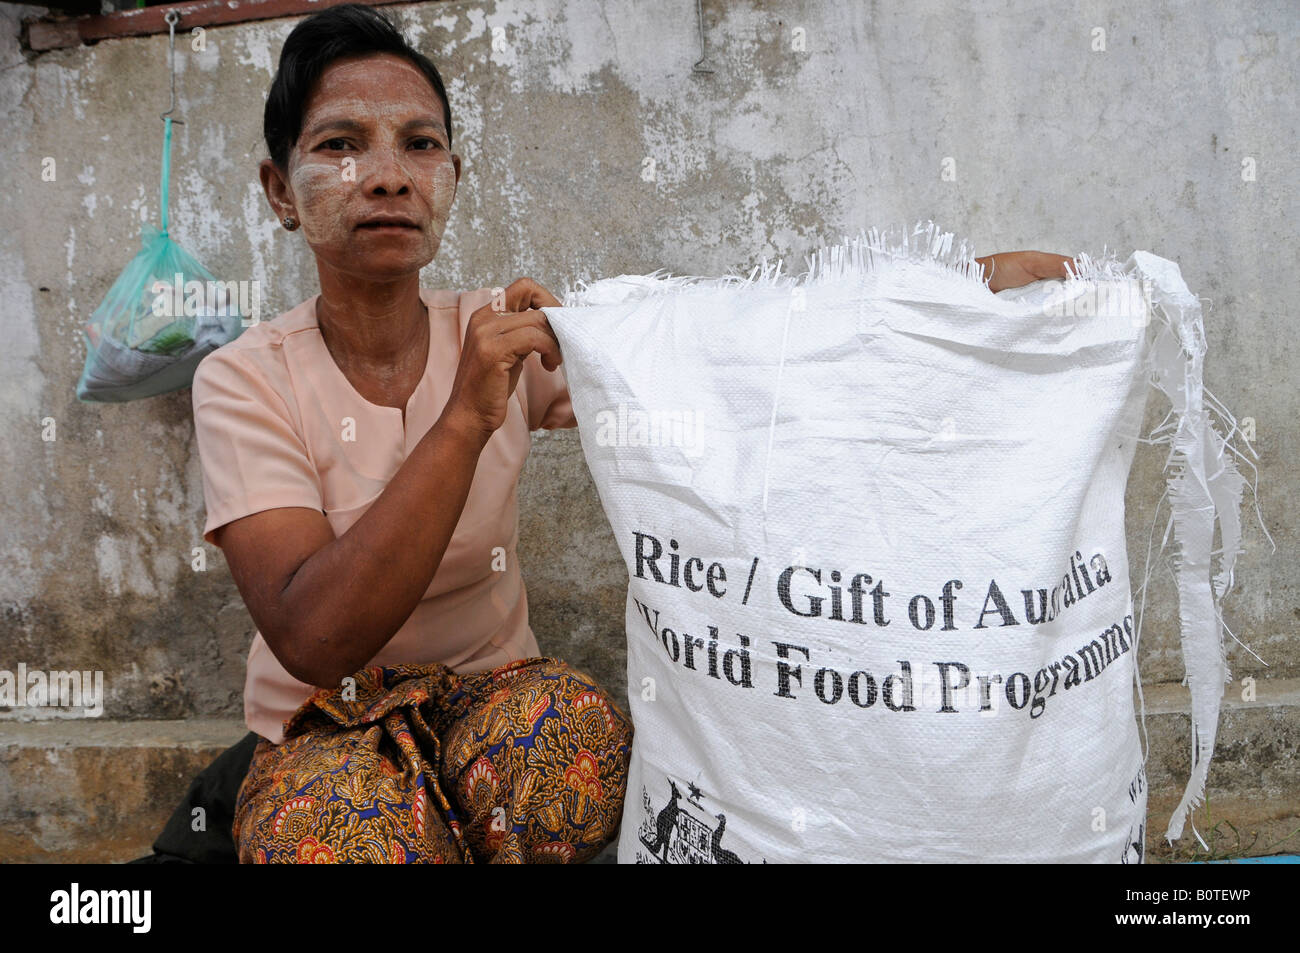 Woman holds a sack with writing reading ' Rice / Gift of Australia World Food Program' during food distribution carried out by WFP in Myanmar Stock Photo